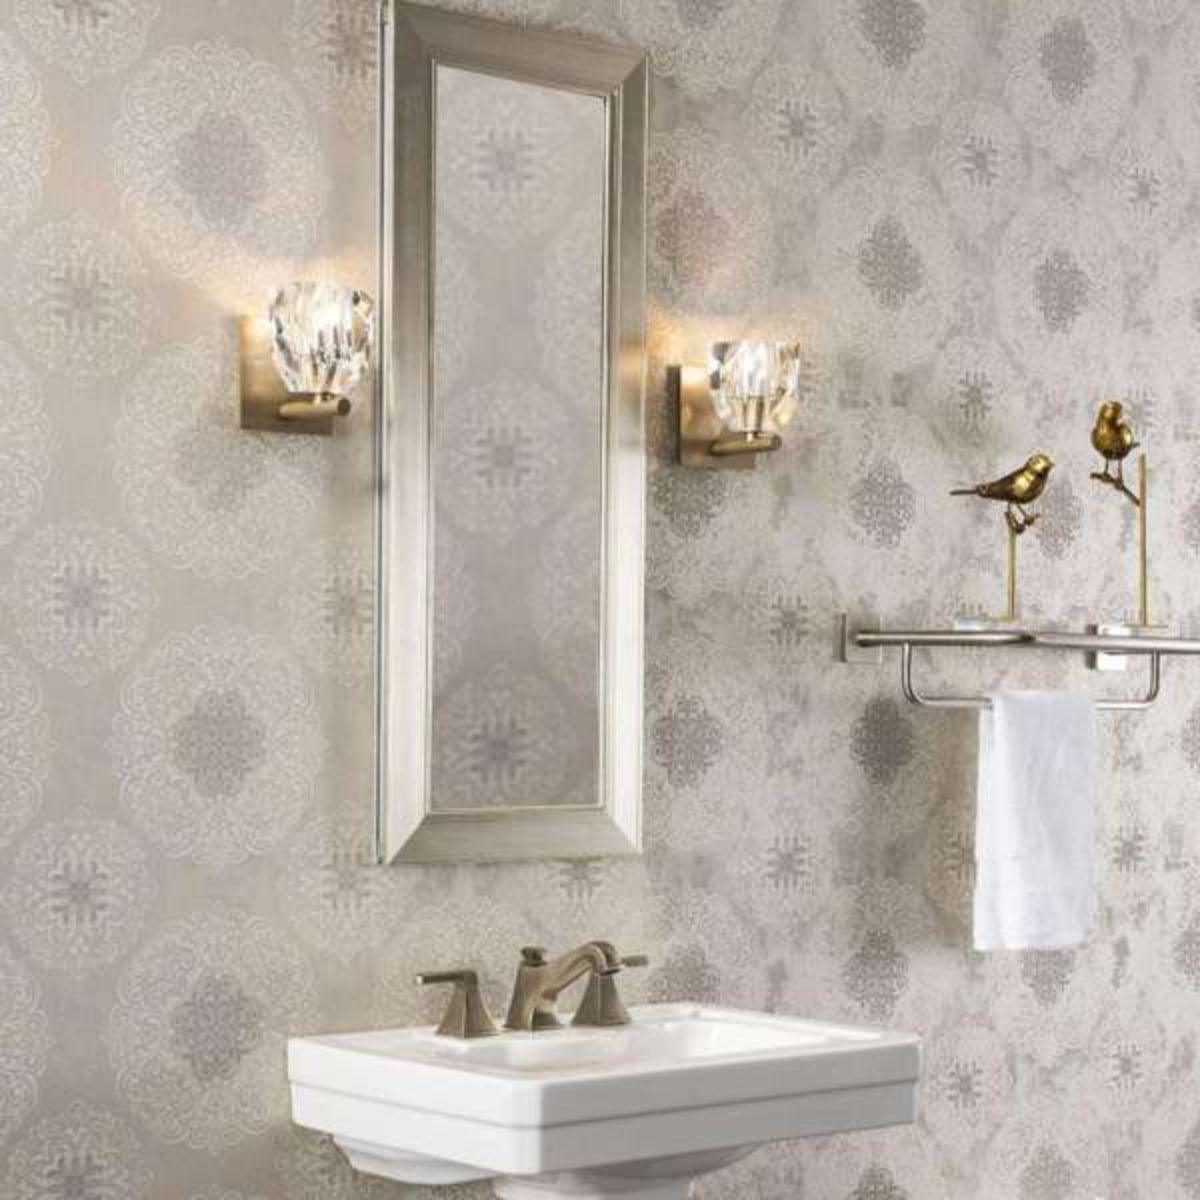 Gatsby 6 in. Armed Sconce